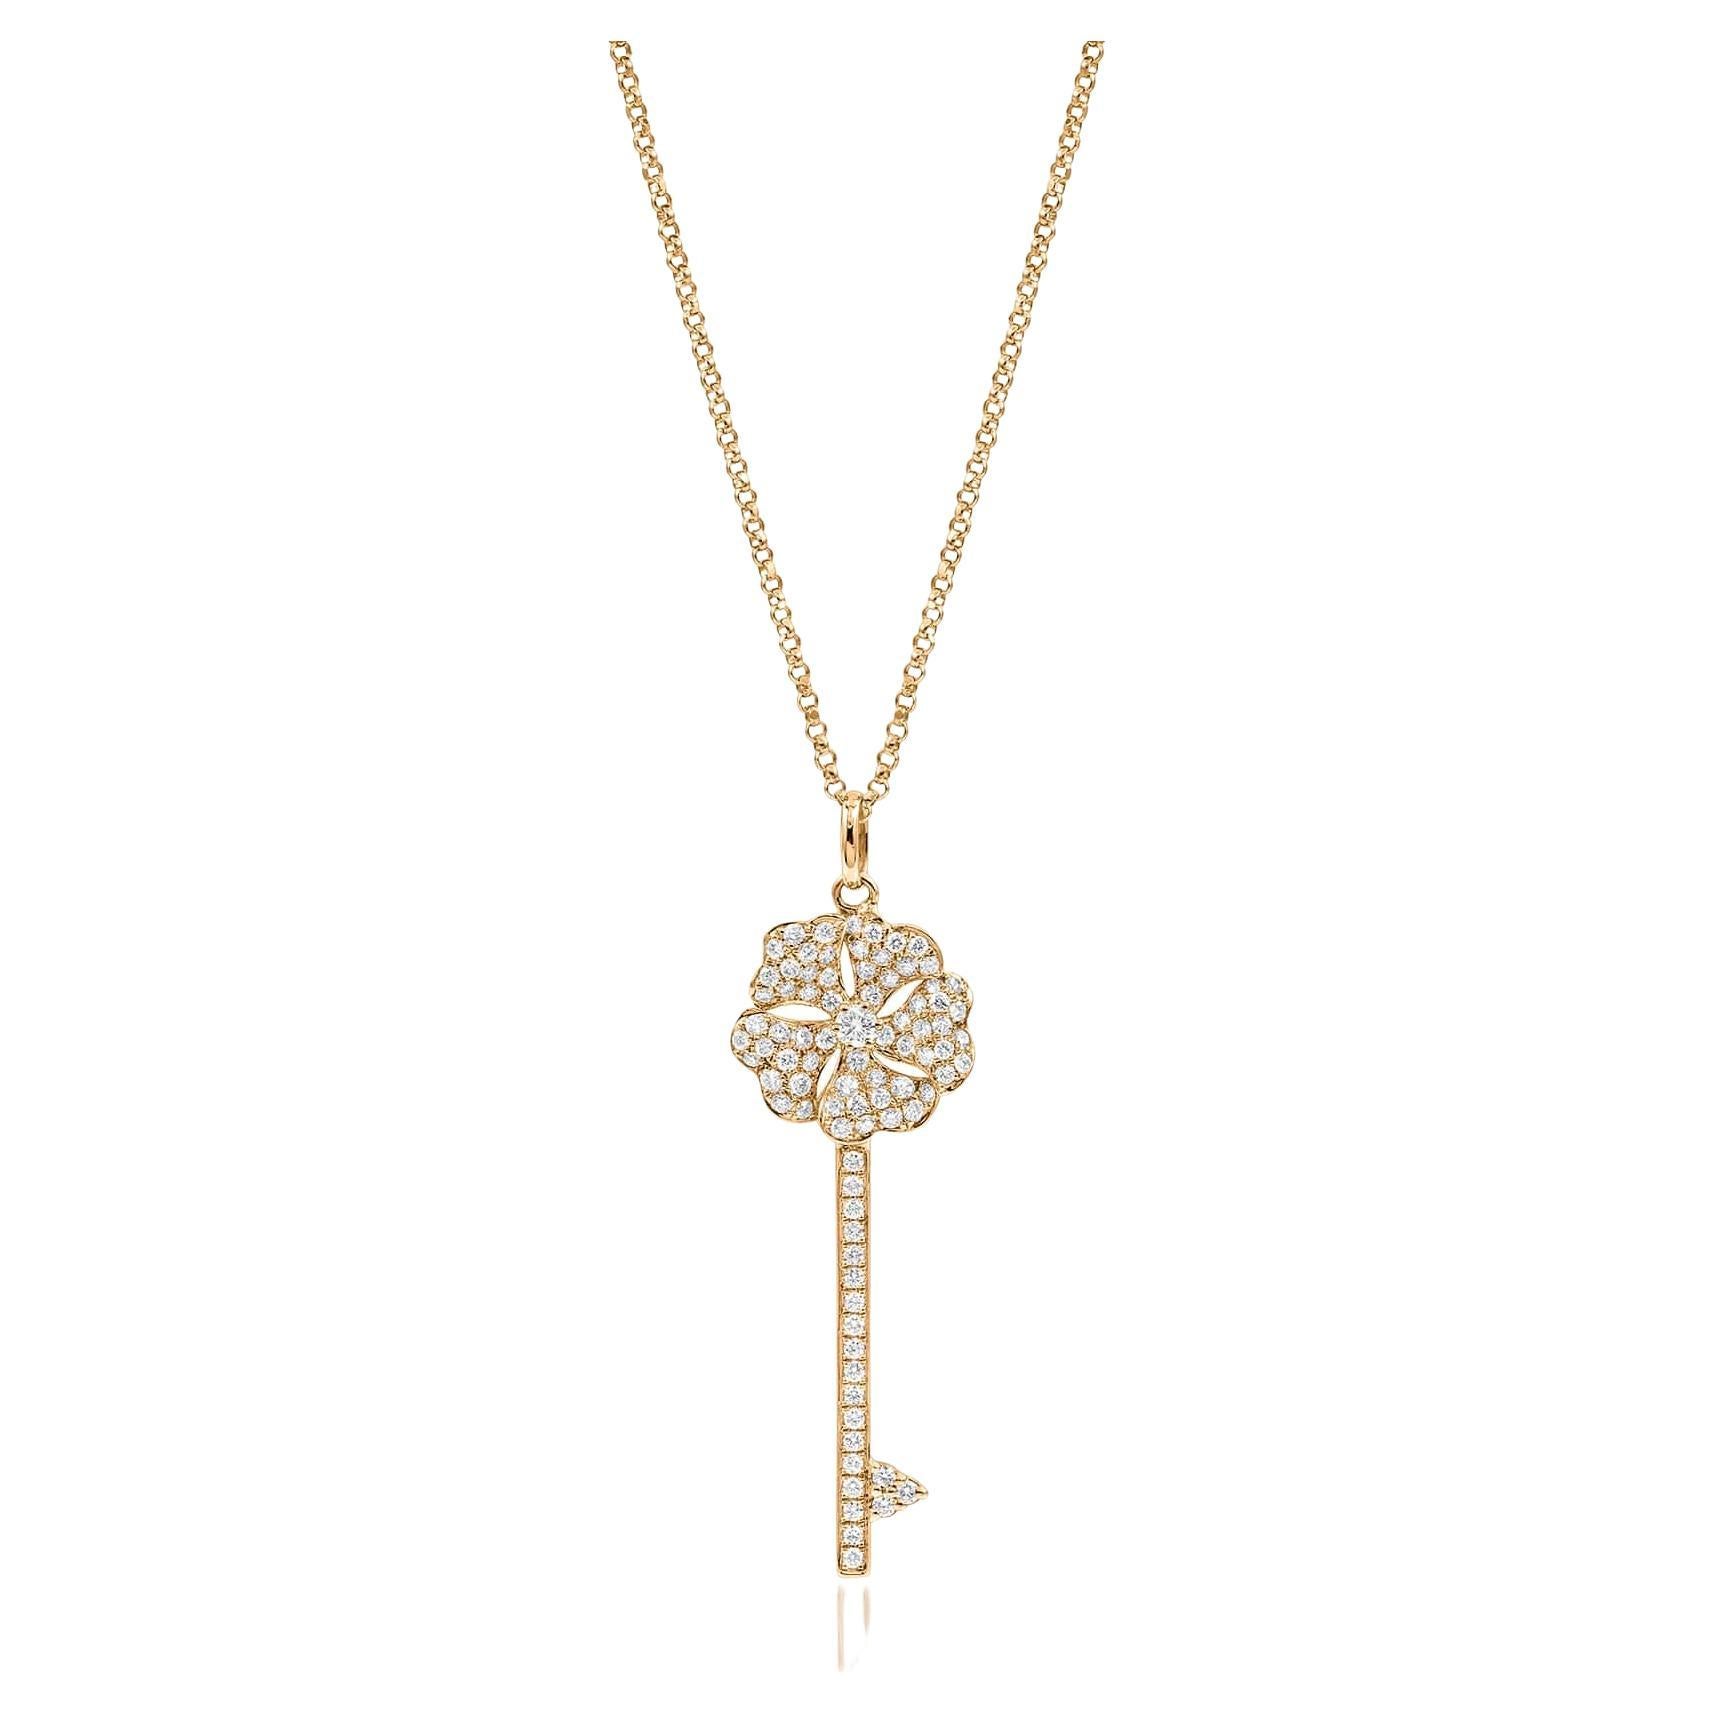 Bloom Diamond Key Necklace in 18k Yellow Gold